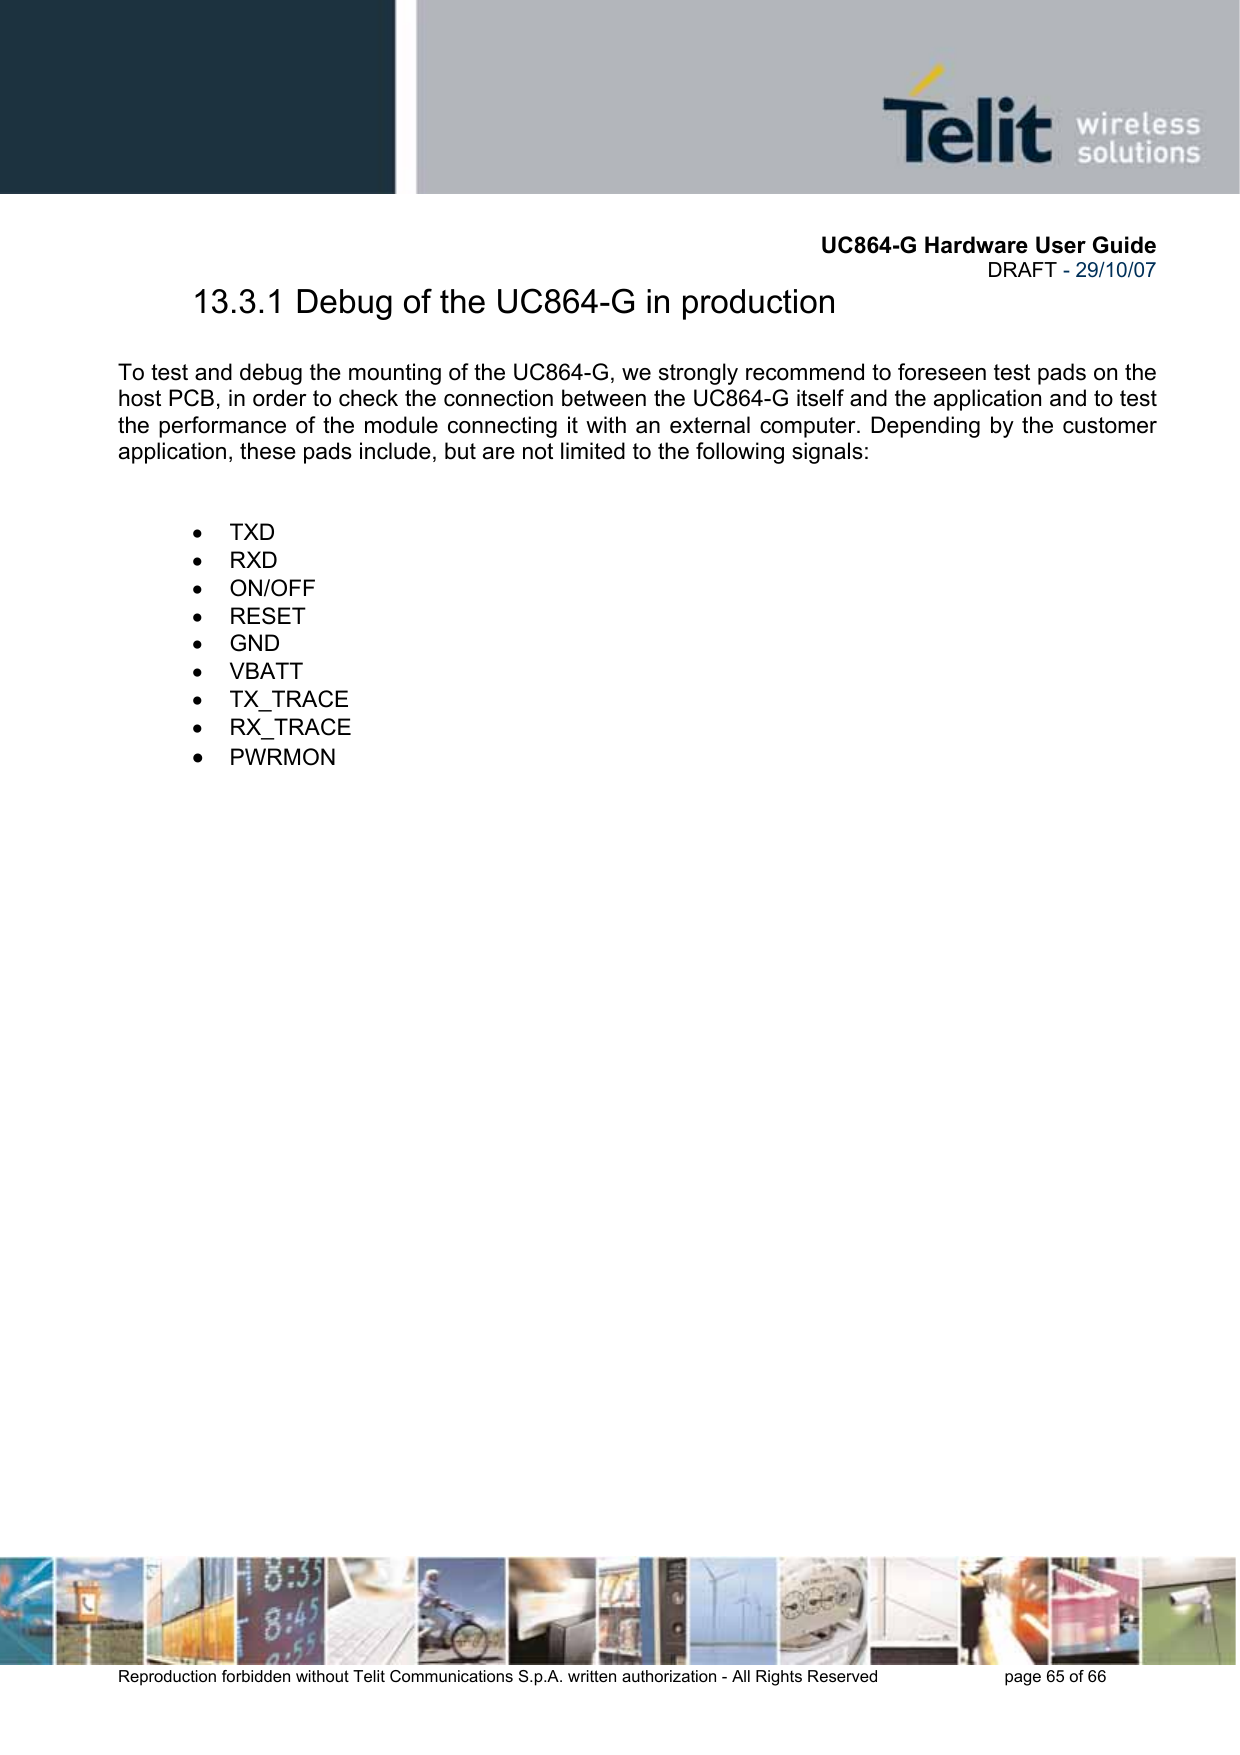       UC864-G Hardware User Guide  DRAFT - 29/10/07      Reproduction forbidden without Telit Communications S.p.A. written authorization - All Rights Reserved    page 65 of 66  13.3.1 Debug of the UC864-G in production  To test and debug the mounting of the UC864-G, we strongly recommend to foreseen test pads on the host PCB, in order to check the connection between the UC864-G itself and the application and to test the performance of the module connecting it with an external computer. Depending by the customer application, these pads include, but are not limited to the following signals:   • TXD • RXD • ON/OFF • RESET • GND • VBATT • TX_TRACE • RX_TRACE • PWRMON  